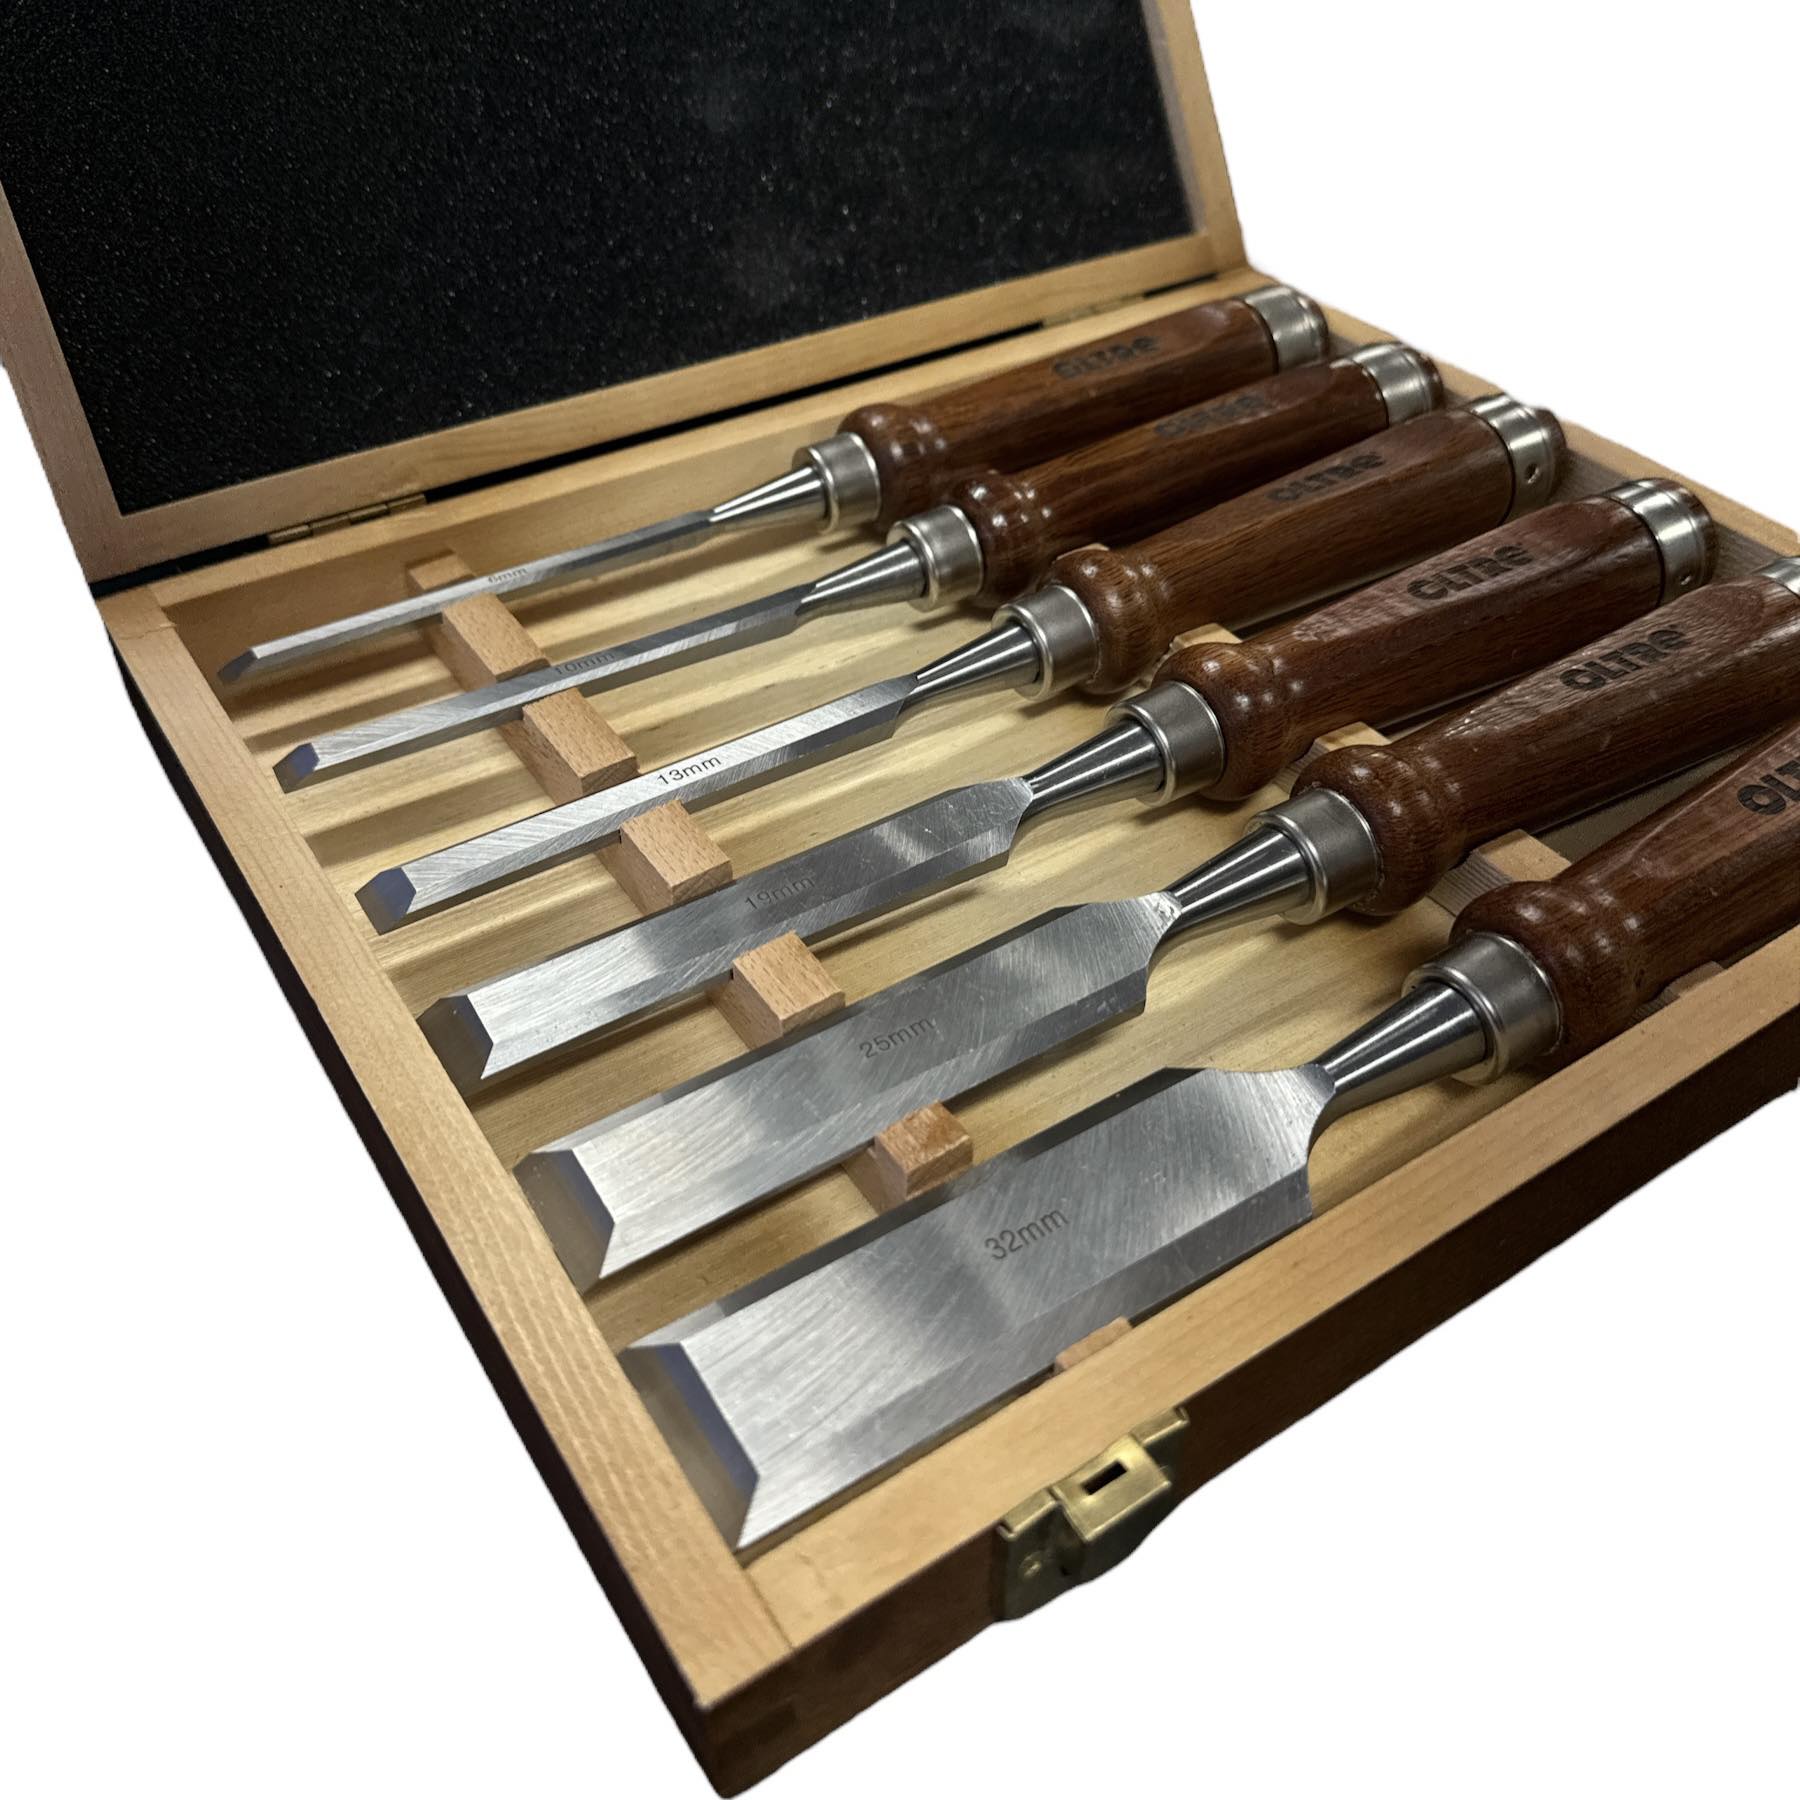 6Pce Woodworking Chisel Set OT-WWCS-6 by Oltre *New Arrival*